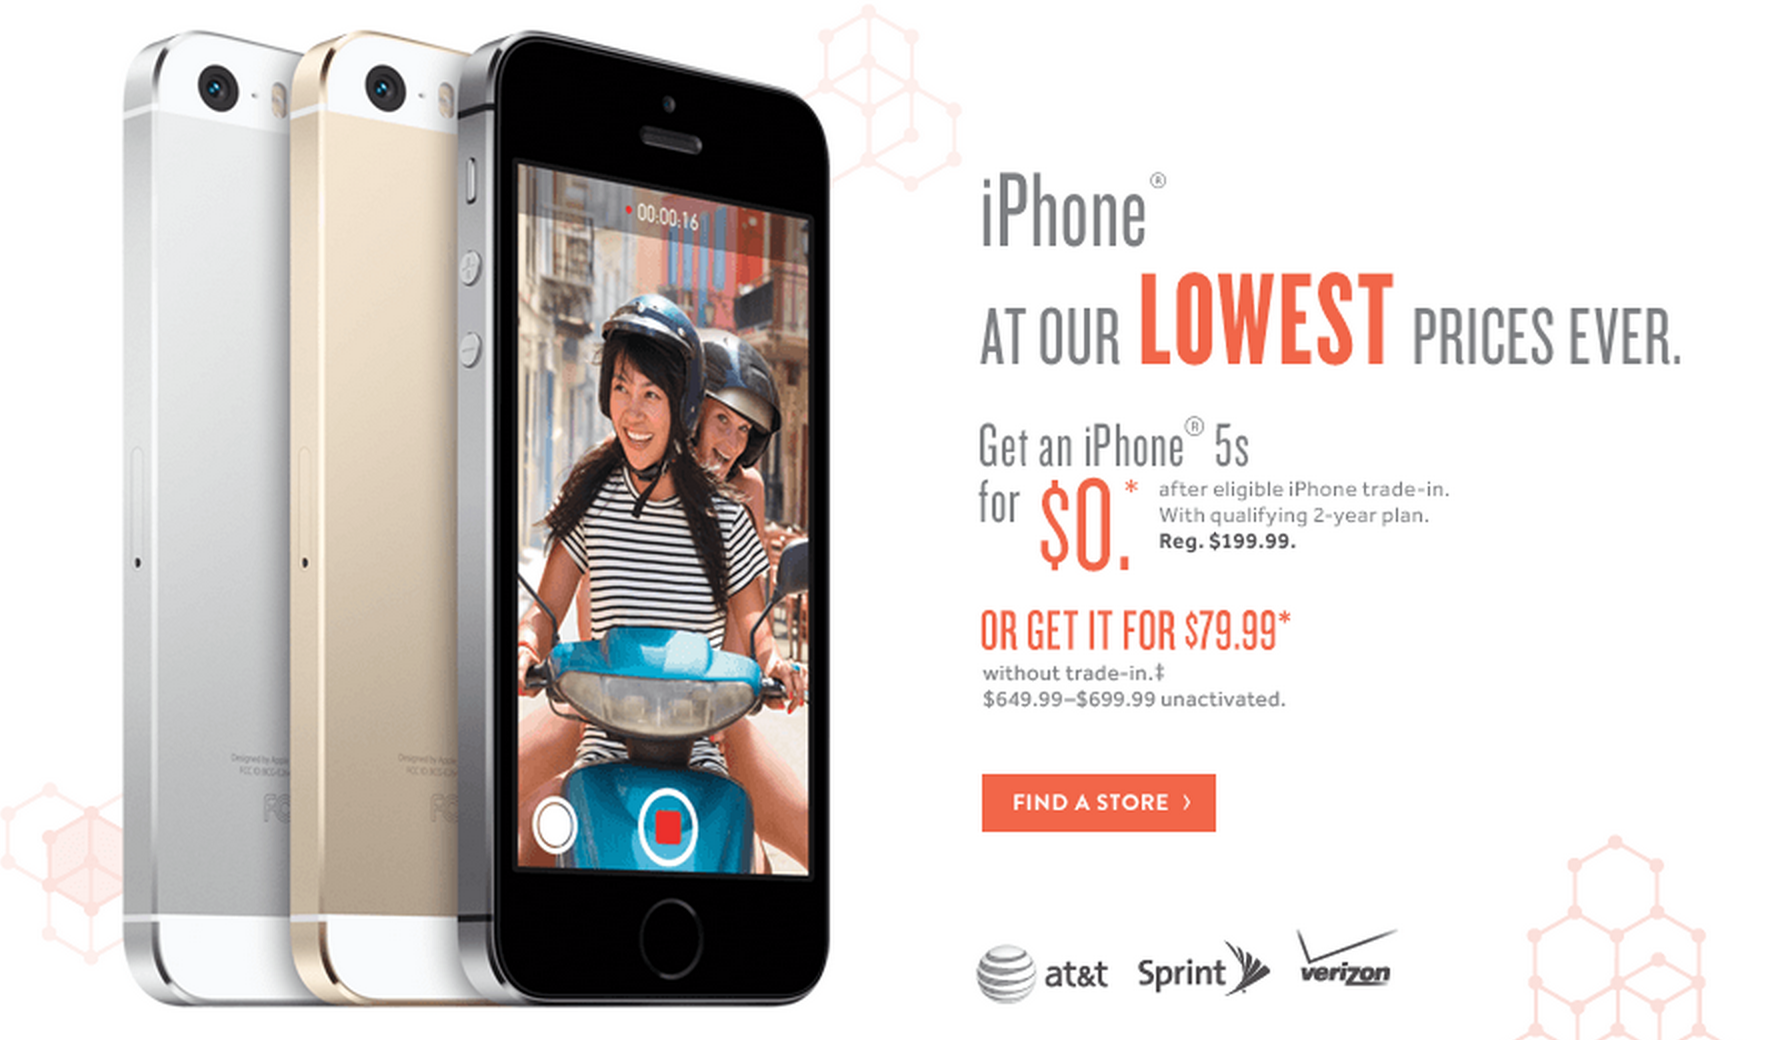 Radioshack Offers 79 Iphone 5s On Contract 30 Iphone 5c Or